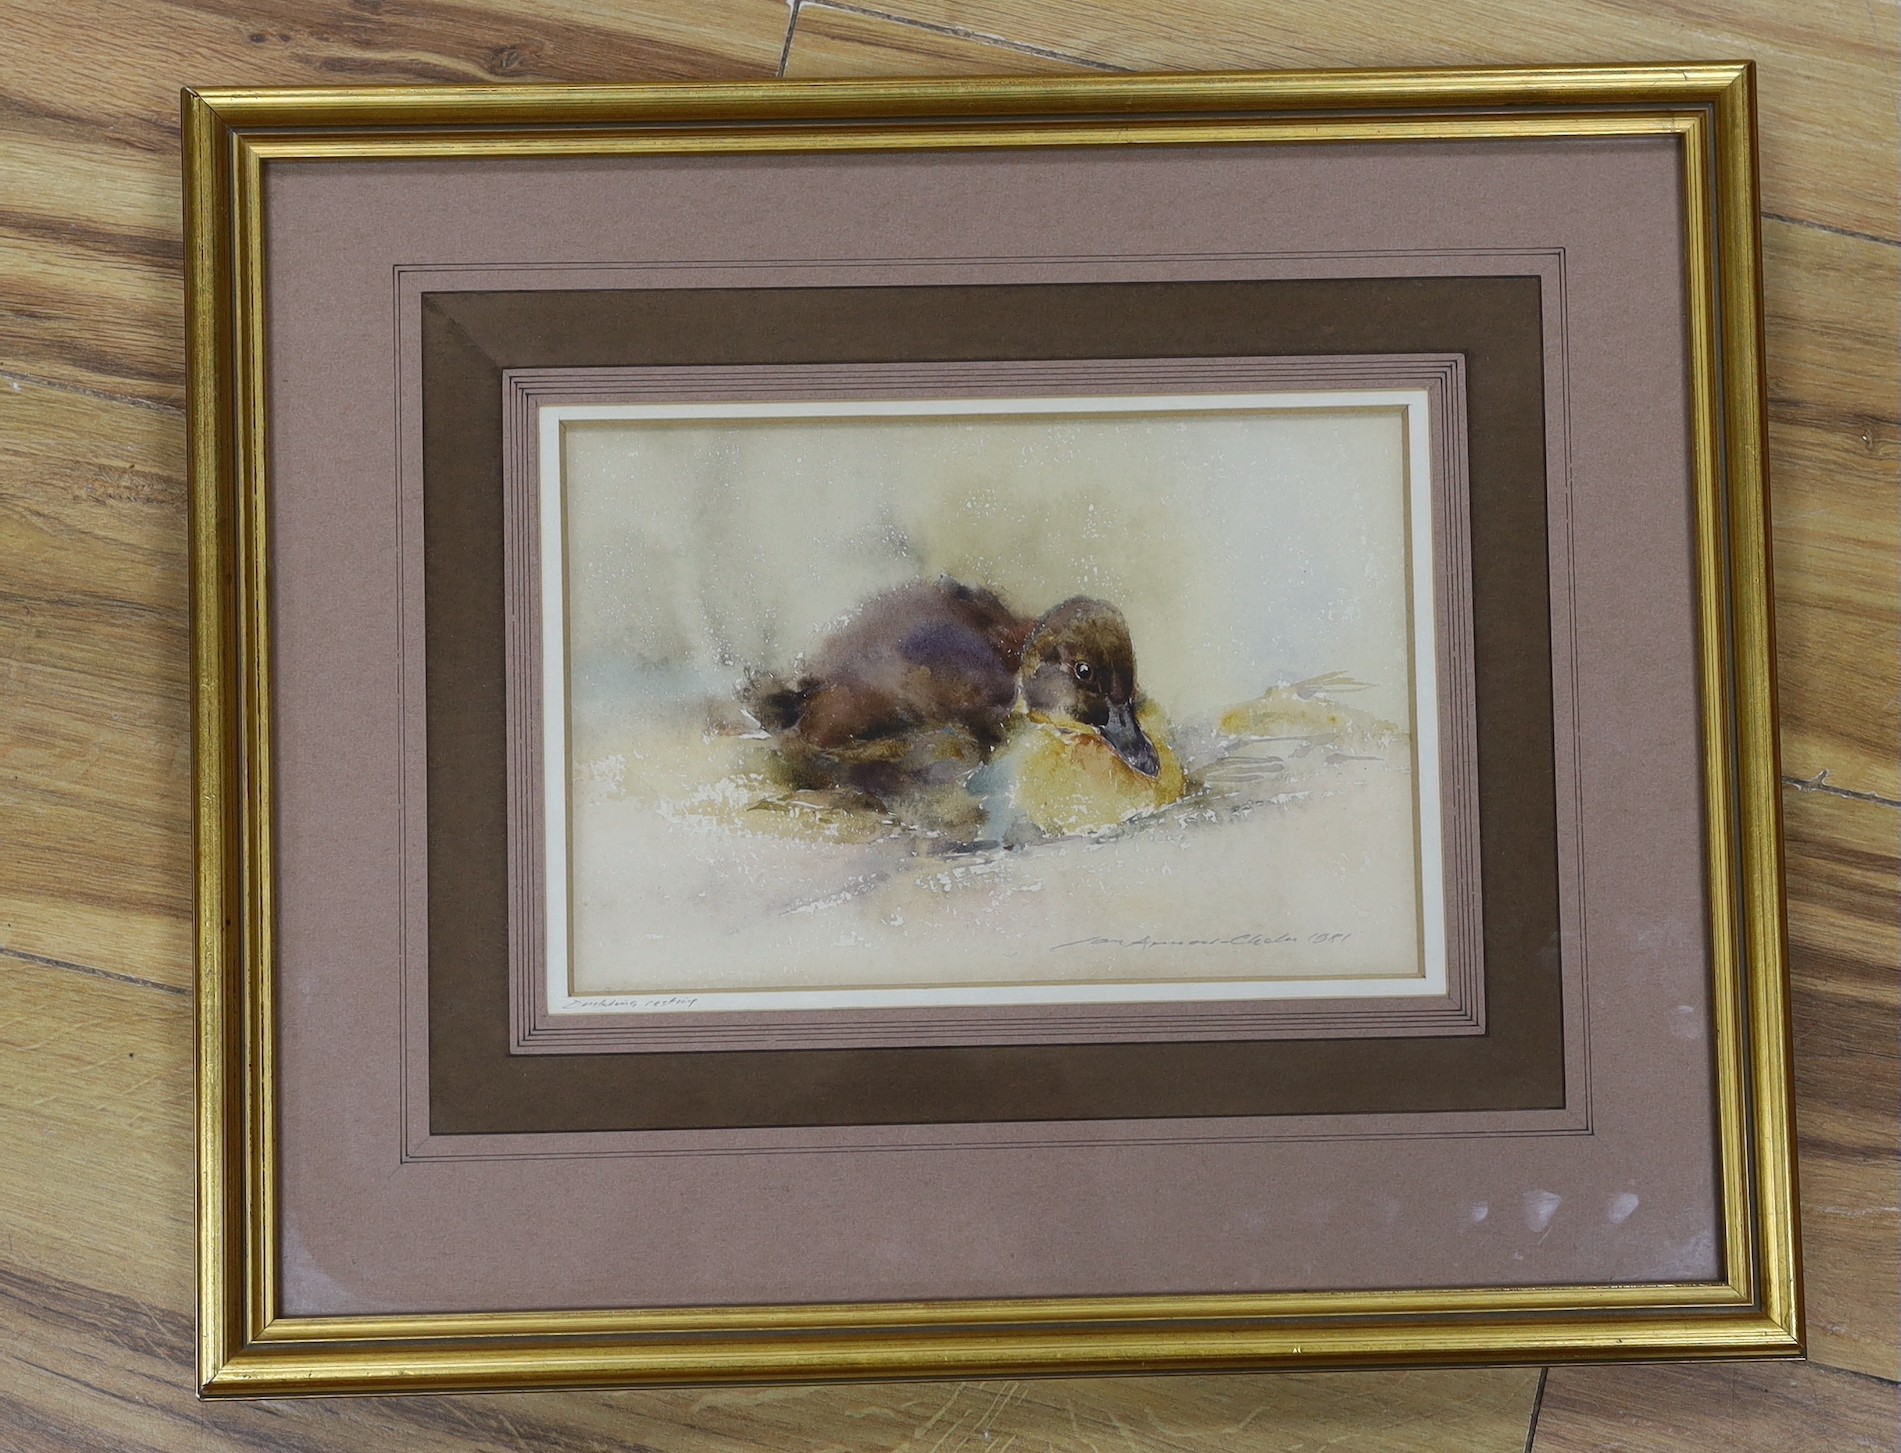 Ian Armour-Chelu (1928-2000), watercolour, Duck resting, signed and dated 1981, 15 x 23cm